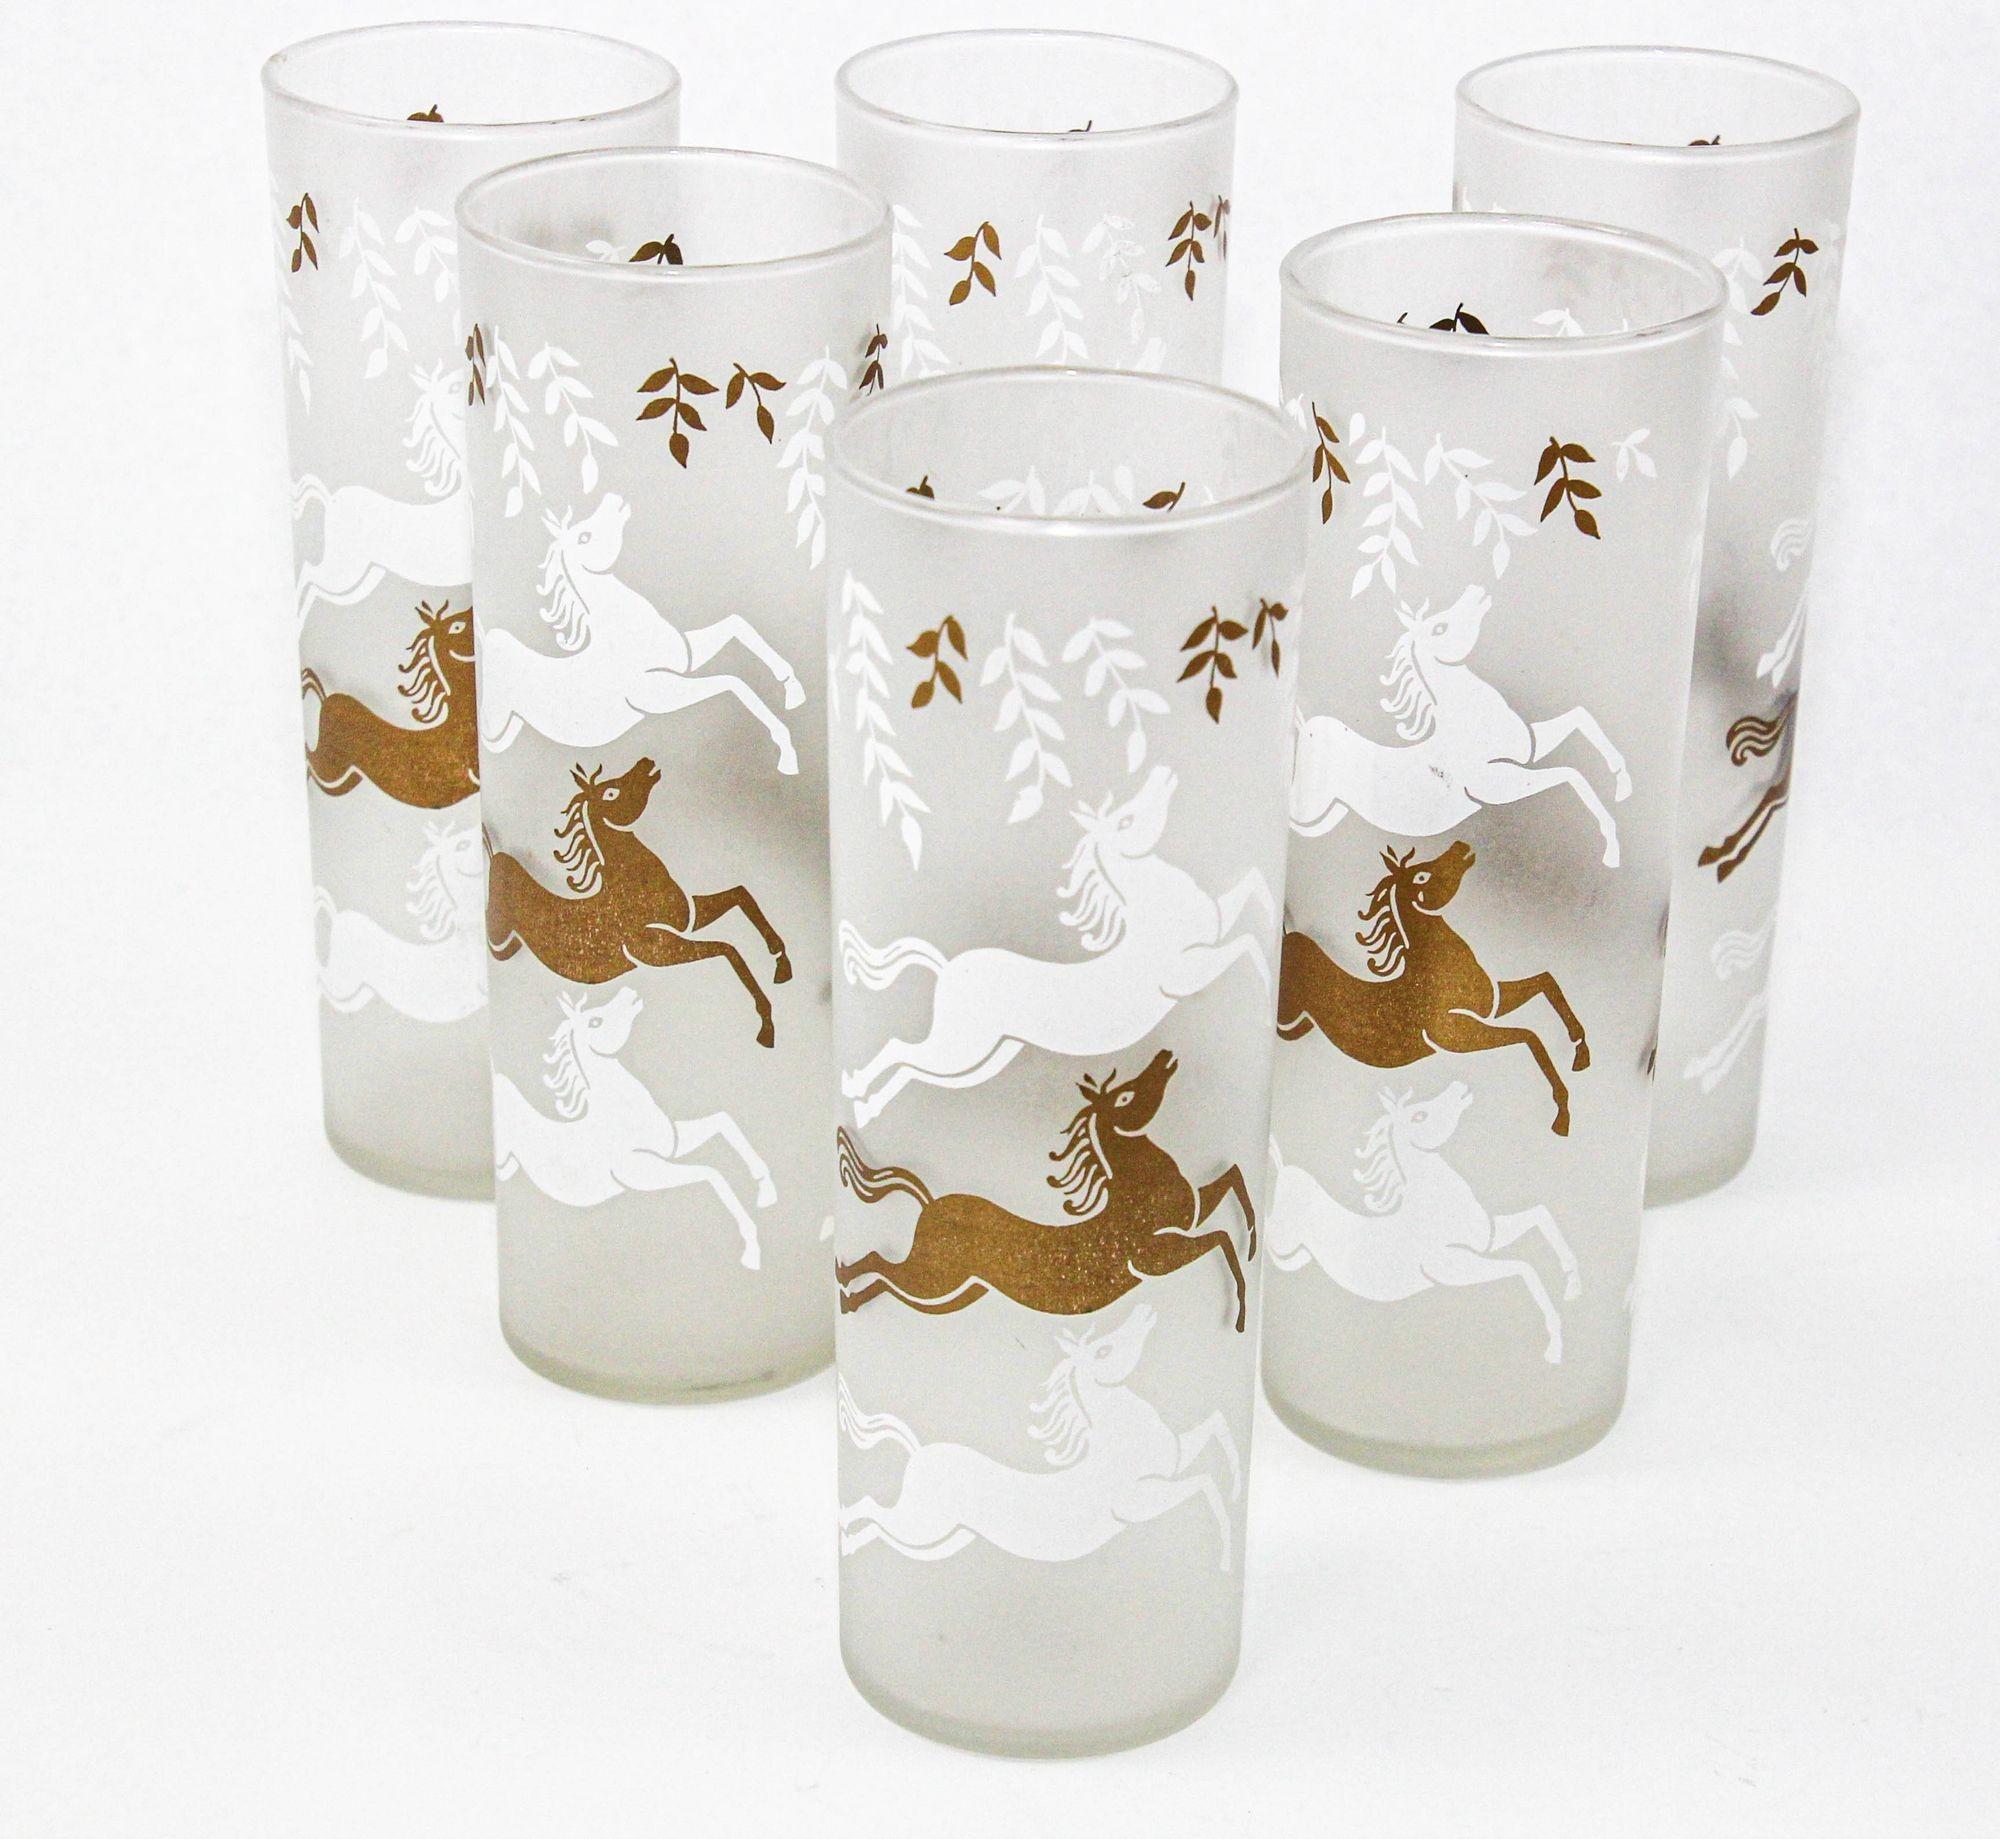 Equestrian Frosted and Gold Drink Glasses Cavalcade by Libbey Galloping Horses In Good Condition For Sale In North Hollywood, CA